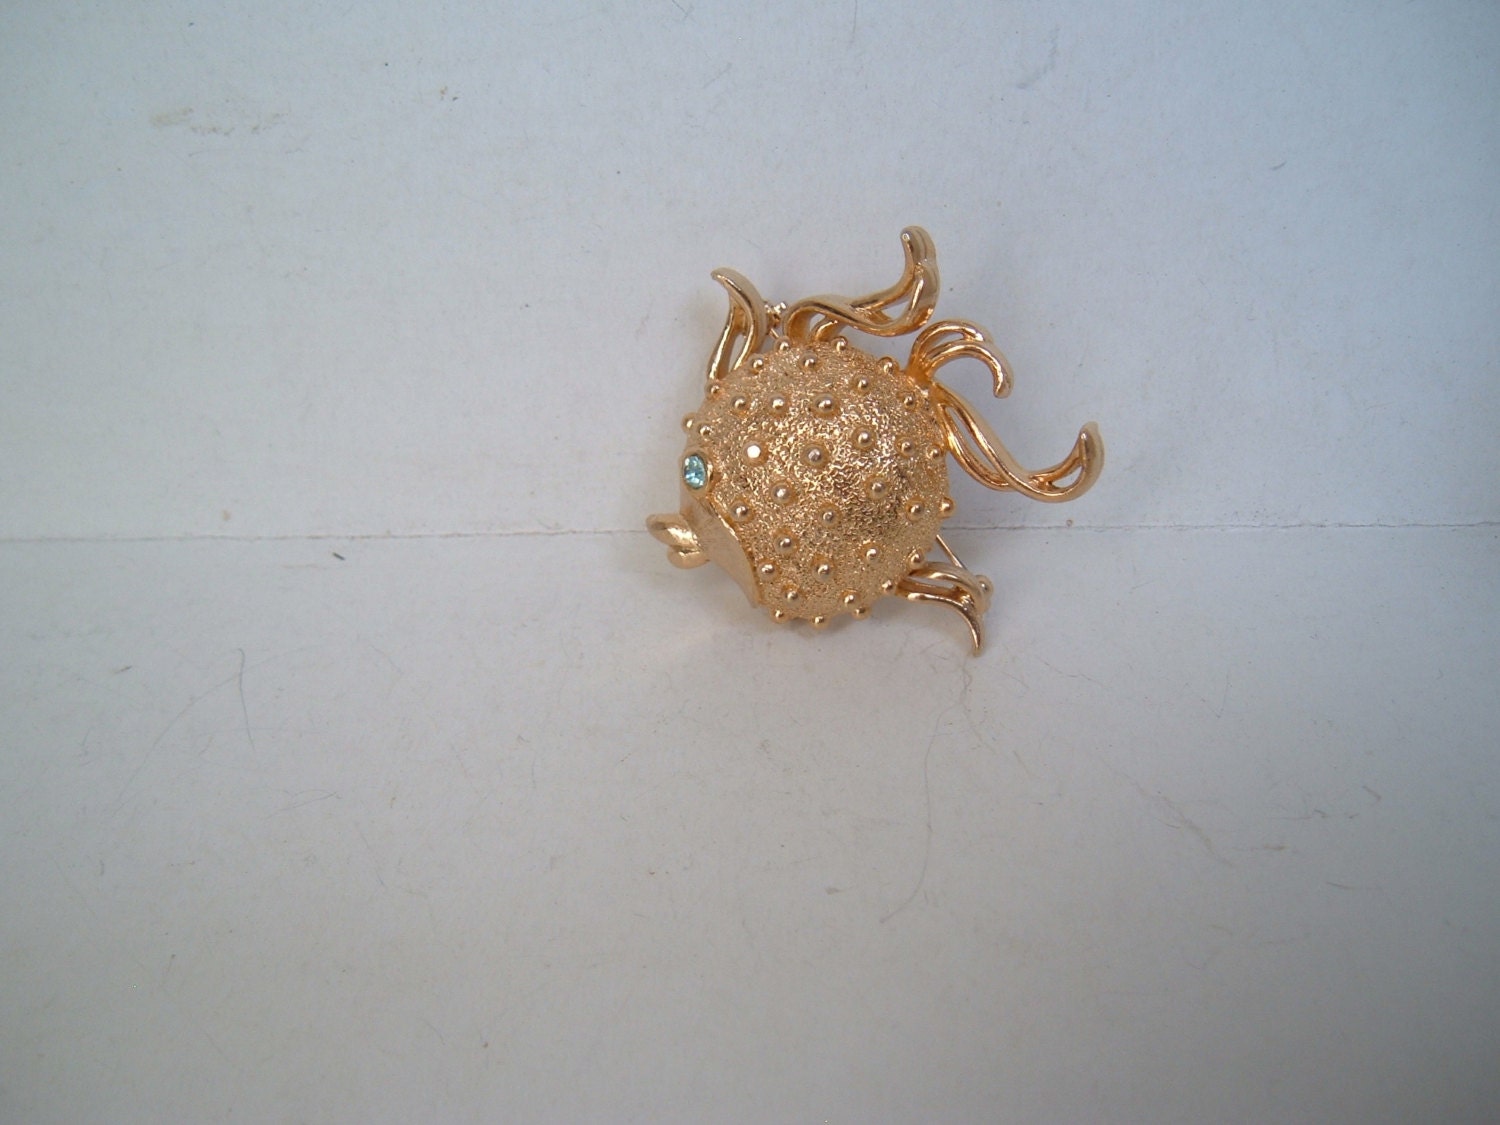 Puffer Fish Brooch Perfume Compactpuffer Fish Jewelry - Etsy